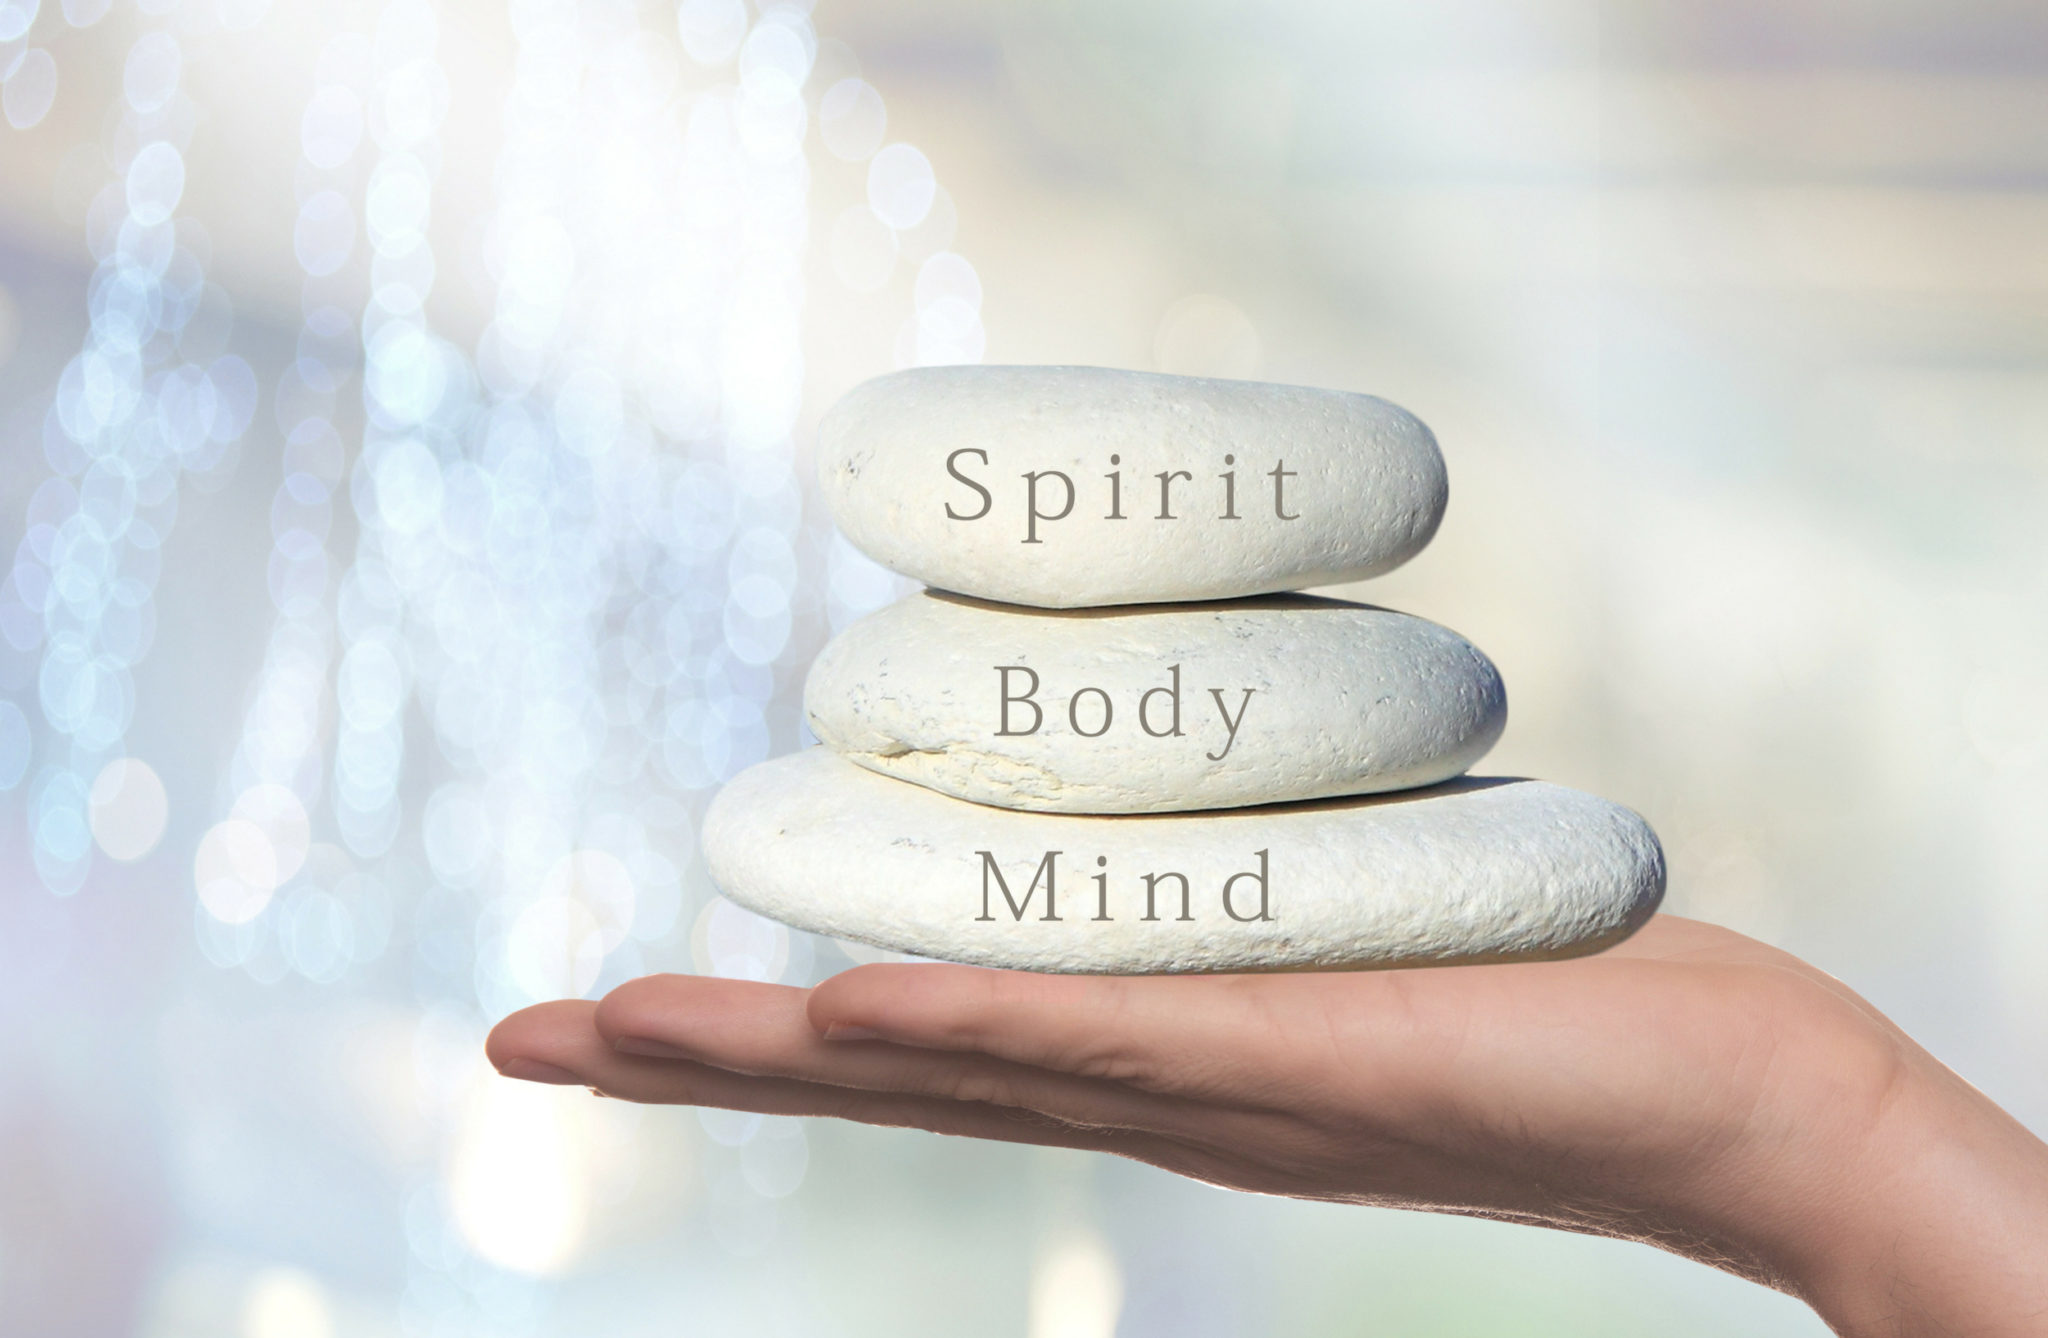 Body Mind and Soul